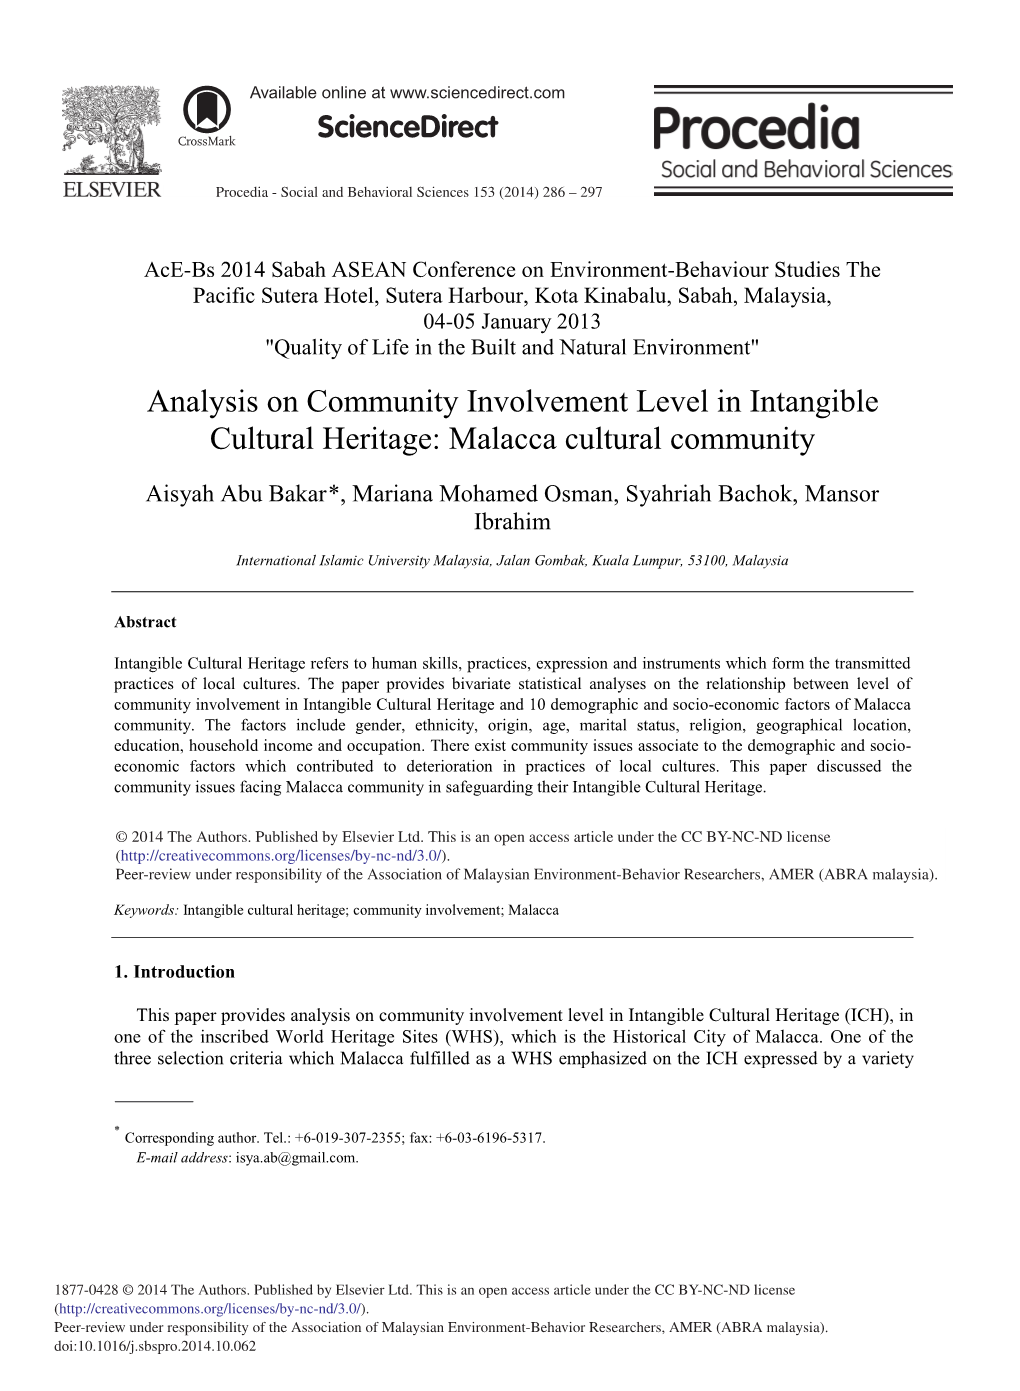 Analysis on Community Involvement Level in Intangible Cultural Heritage: Malacca Cultural Community